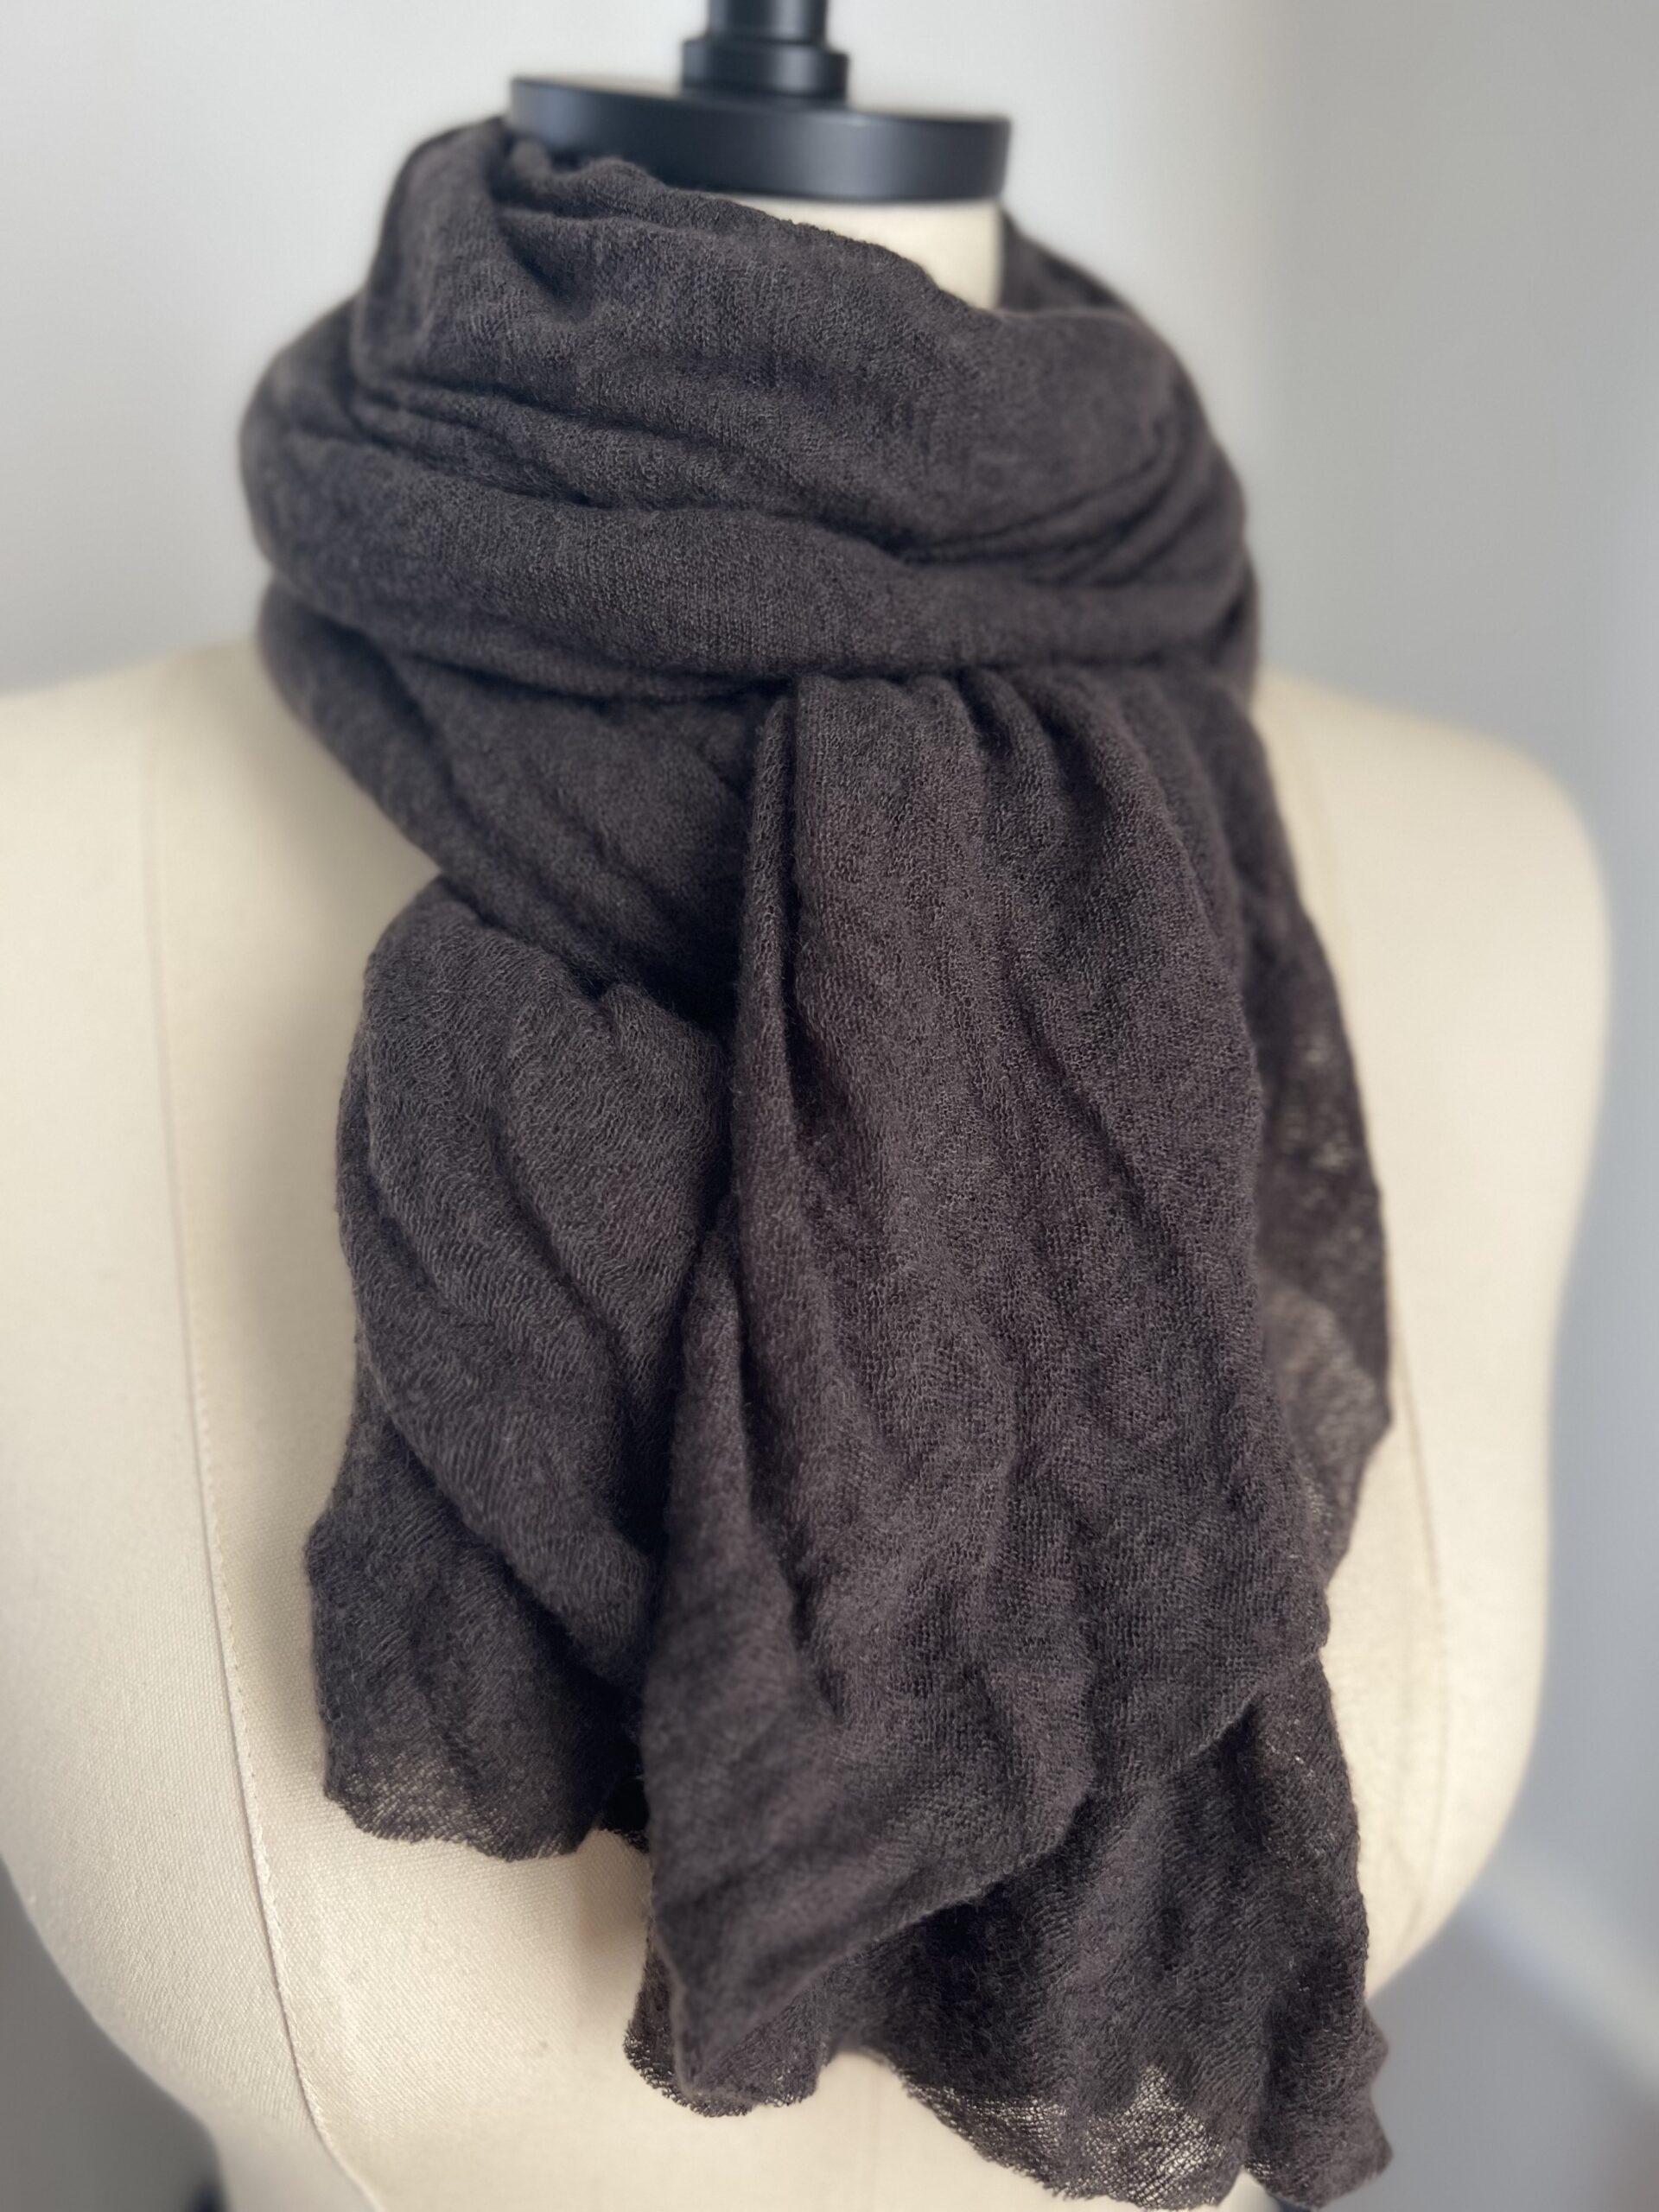 Botto Giuseppe 100% Cashmere Scarf in Chocolate